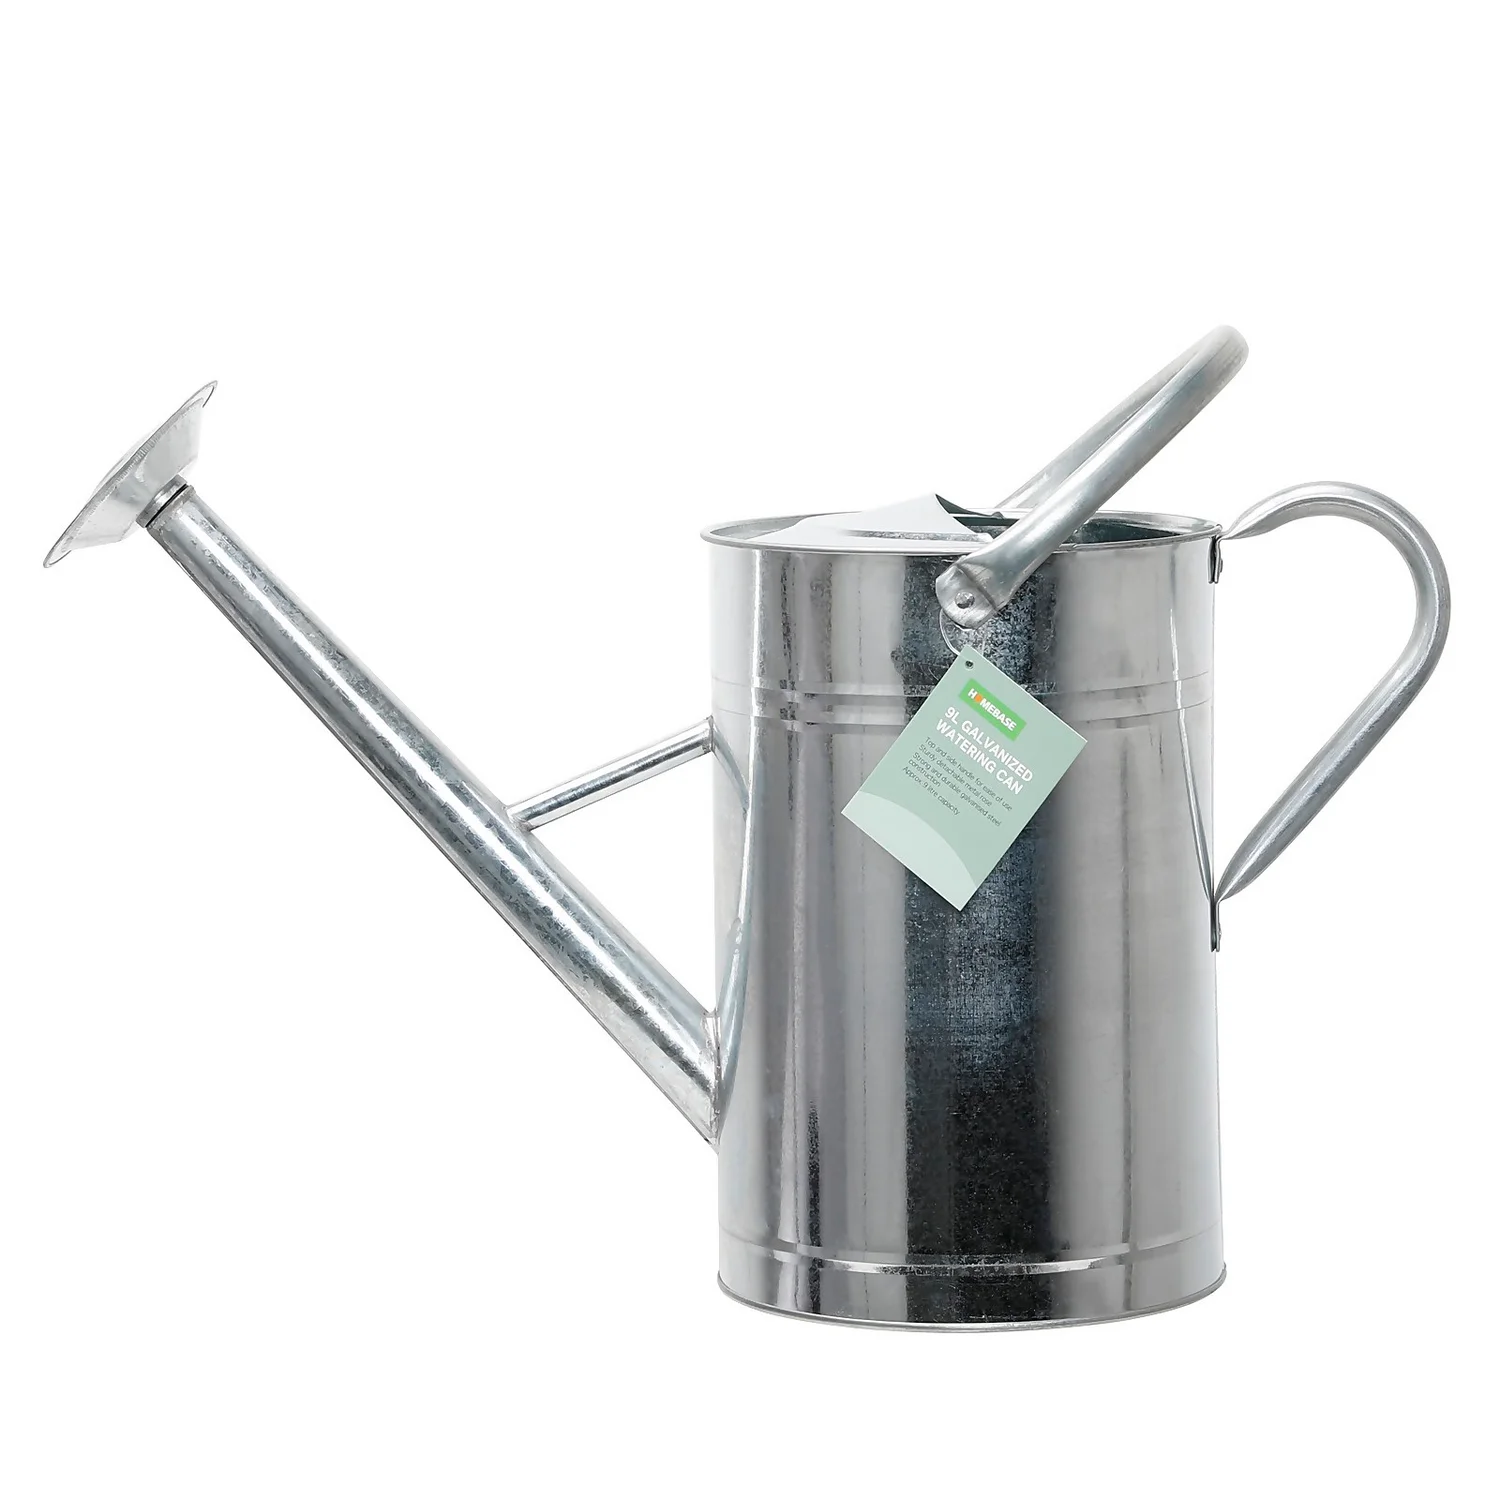 Save: &pound4.50: Homebase Galvanised Watering Can - 9L
